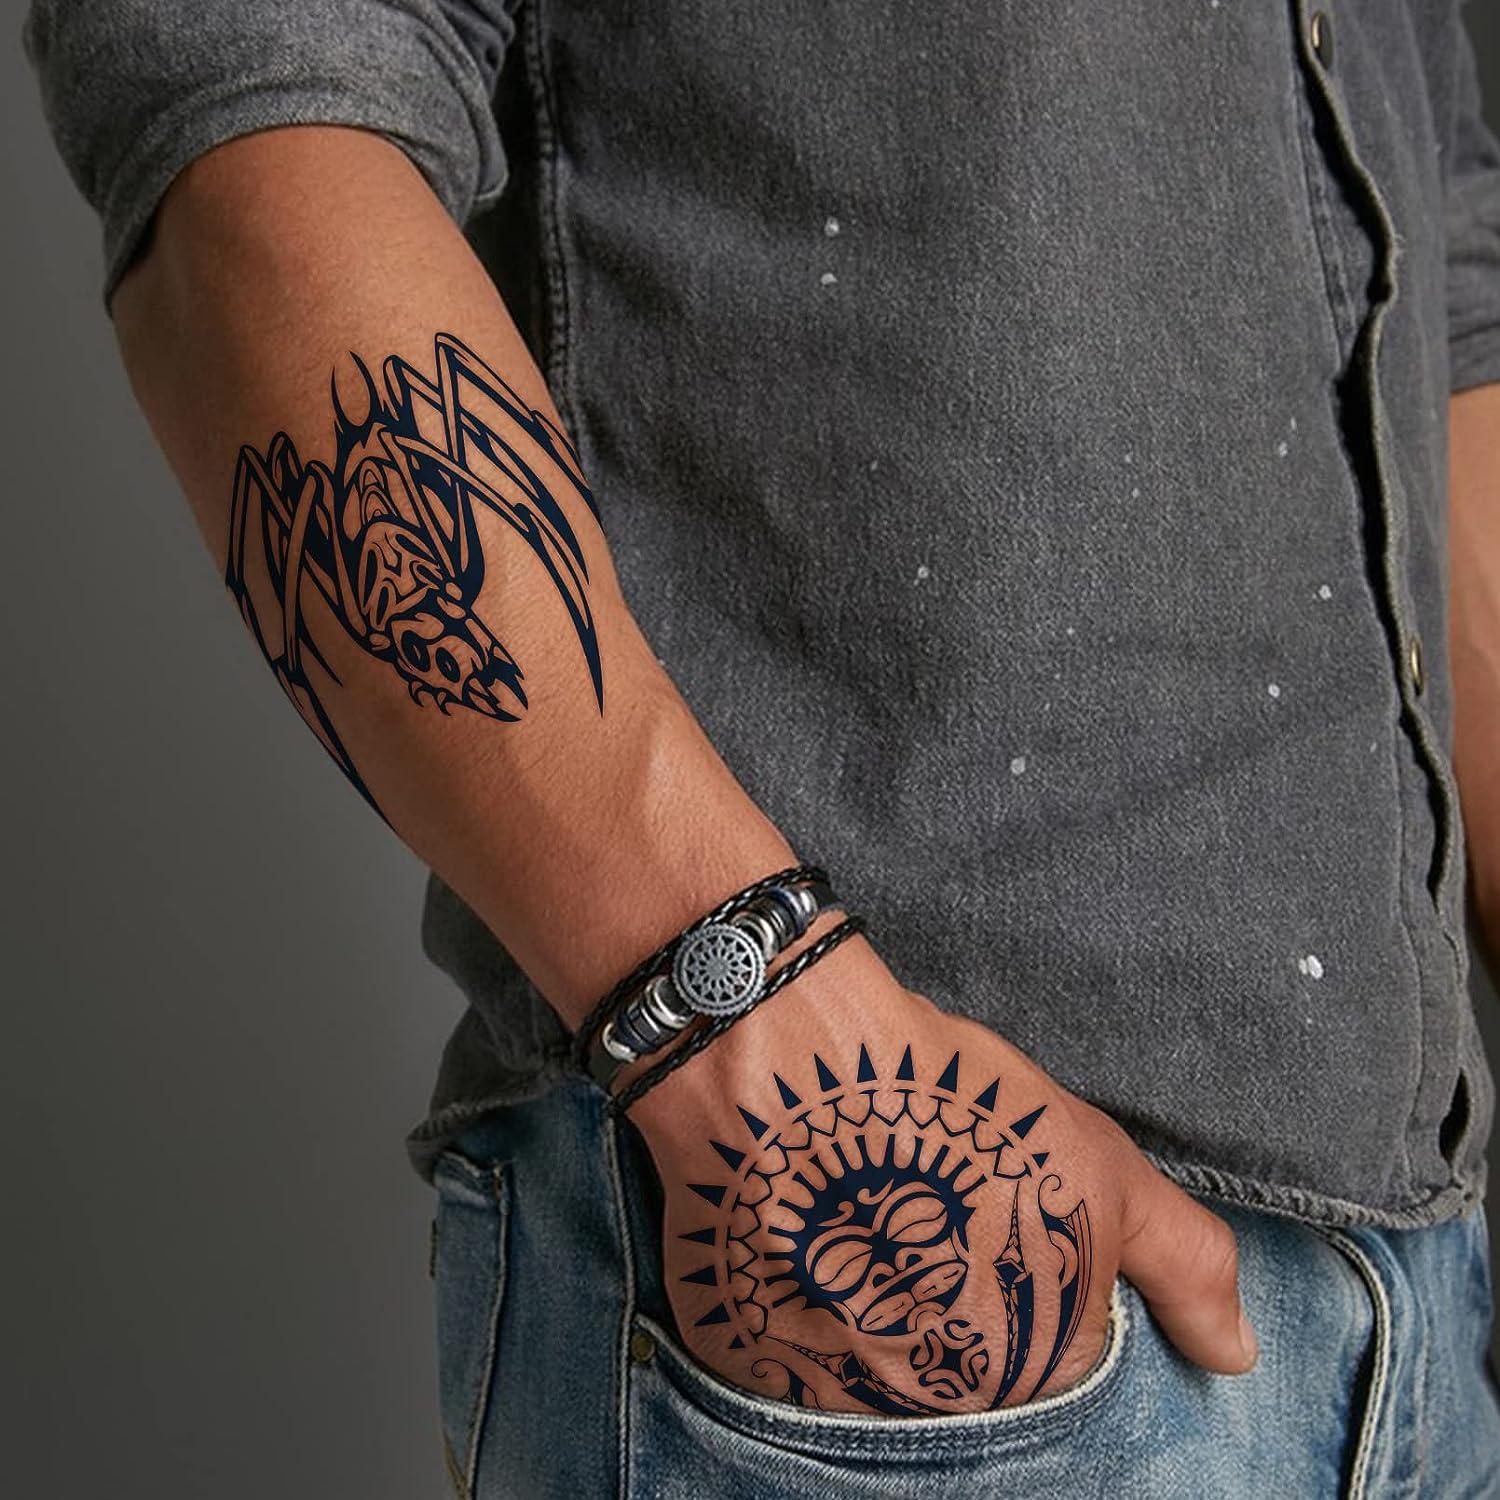 Amazon.com : CUTELIILI 10 Pcs Viking Face Tattoo Aztec Tattoo for the Back  of Hands and Forearms, Cool Bule Tribal Tattoo Sleeves Men Long Lasting :  Beauty & Personal Care